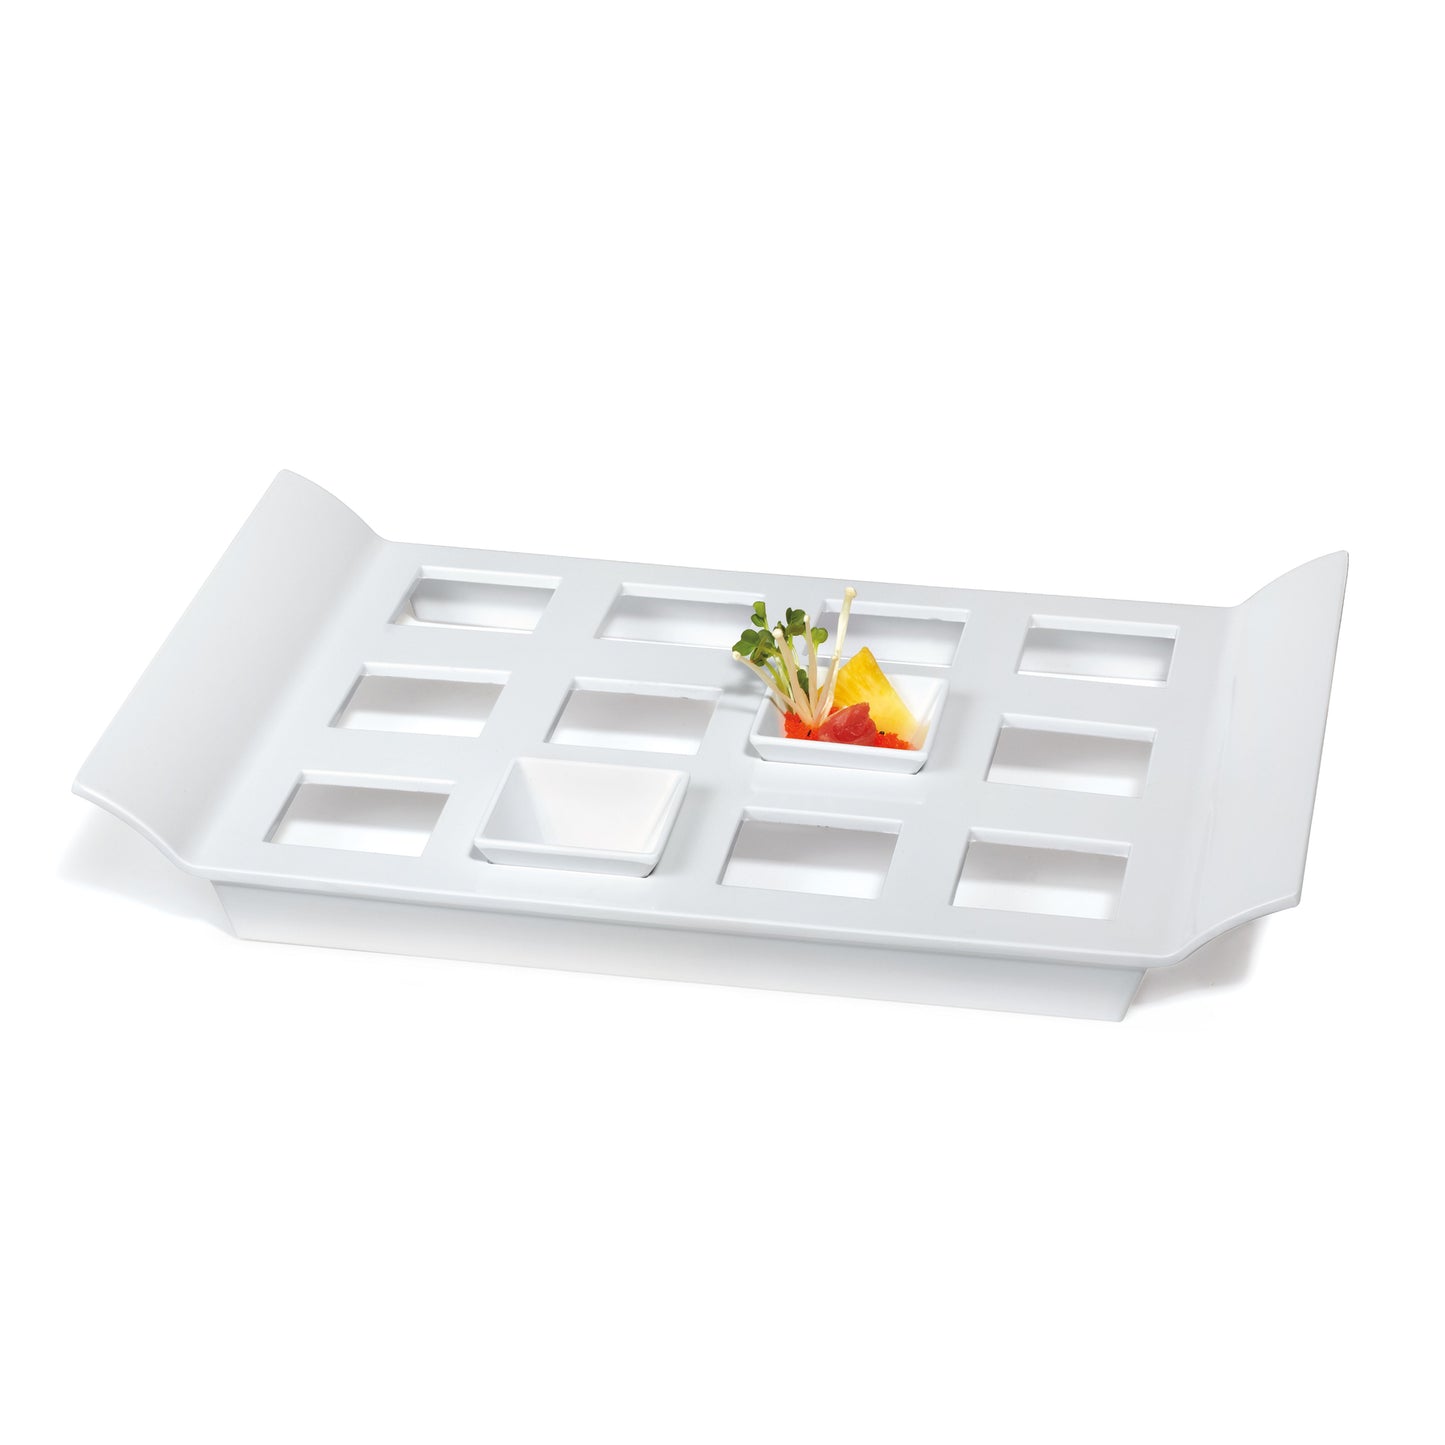 18" x 13" Slotted Display Tray (with 12 square slots 2.5" x 2.5")